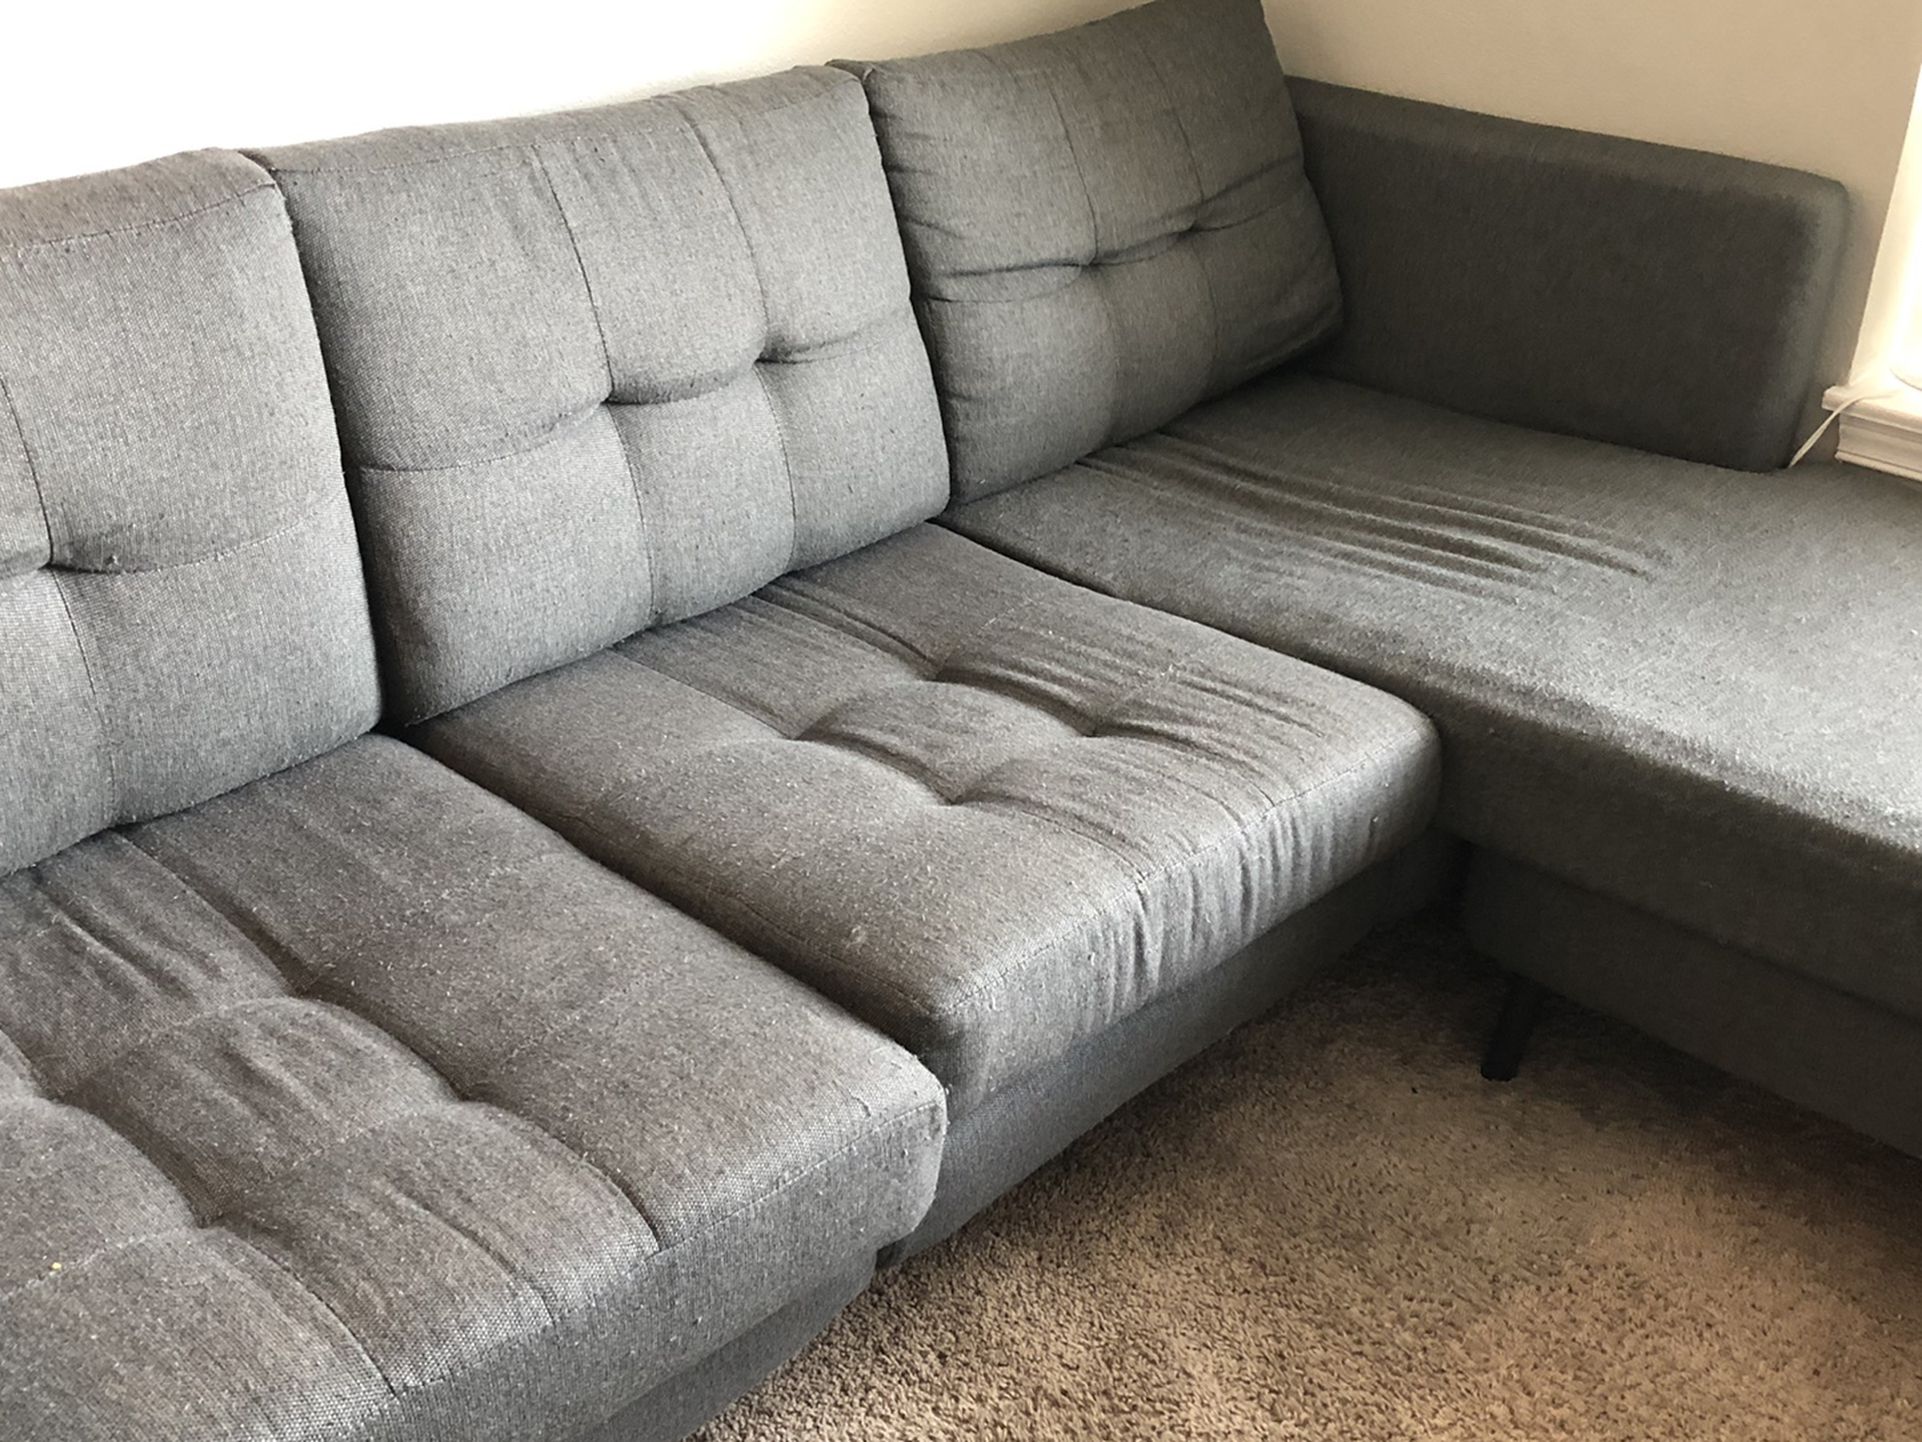 Gray Couch w/ Chaise (Burrow brand)